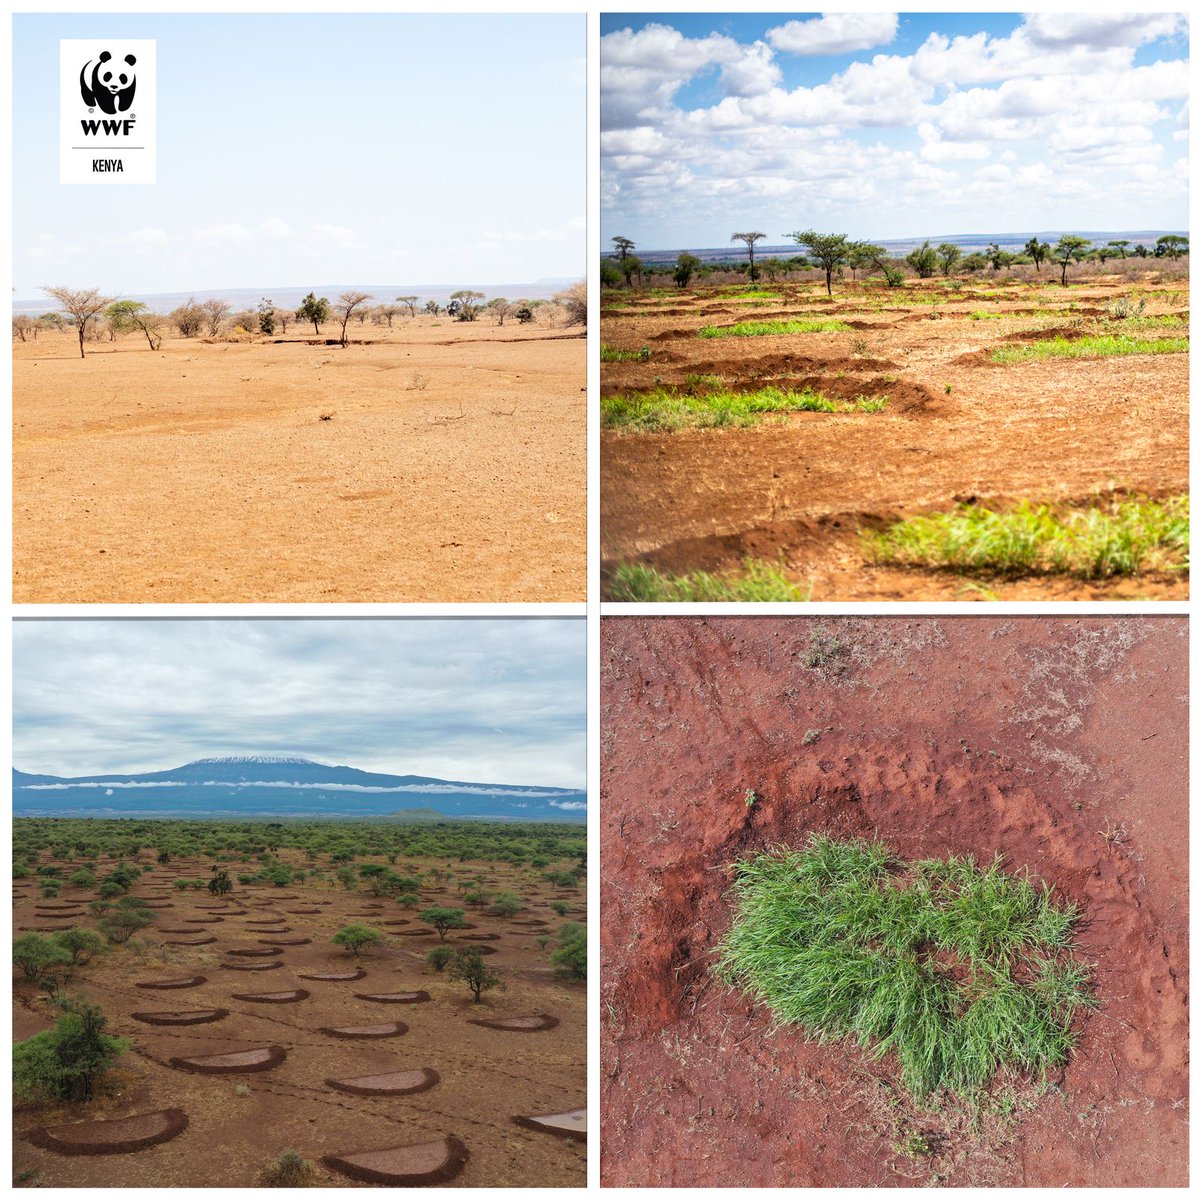 'We dig earth smiles to stop soil erosion and plant grass in the soil walls to enhance the health of our land. Through the Amboseli Land Owners Conservation Association (ALOCA), we want to ensure there is enough pasture for our livestock and wildlife, reducing human-wildlife